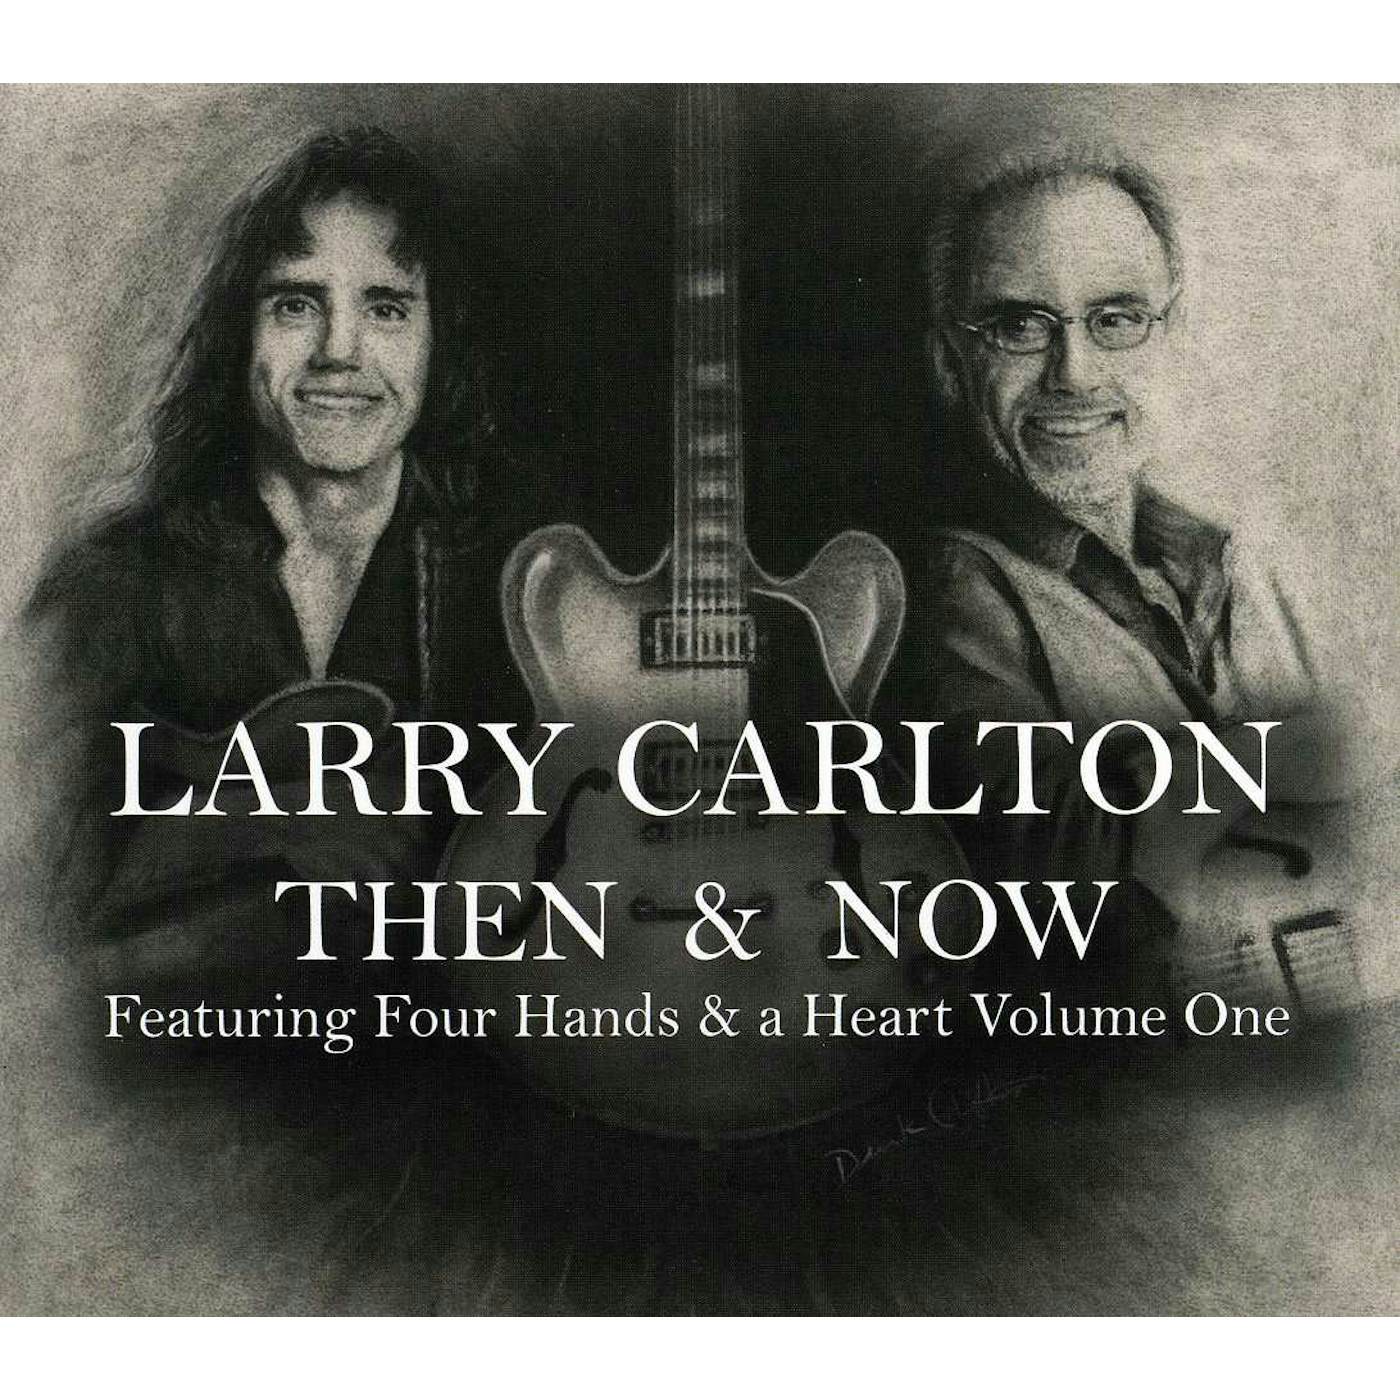 Larry Carlton THEN & NOW FEATURING FOUR HANDS & A HEART 1 CD